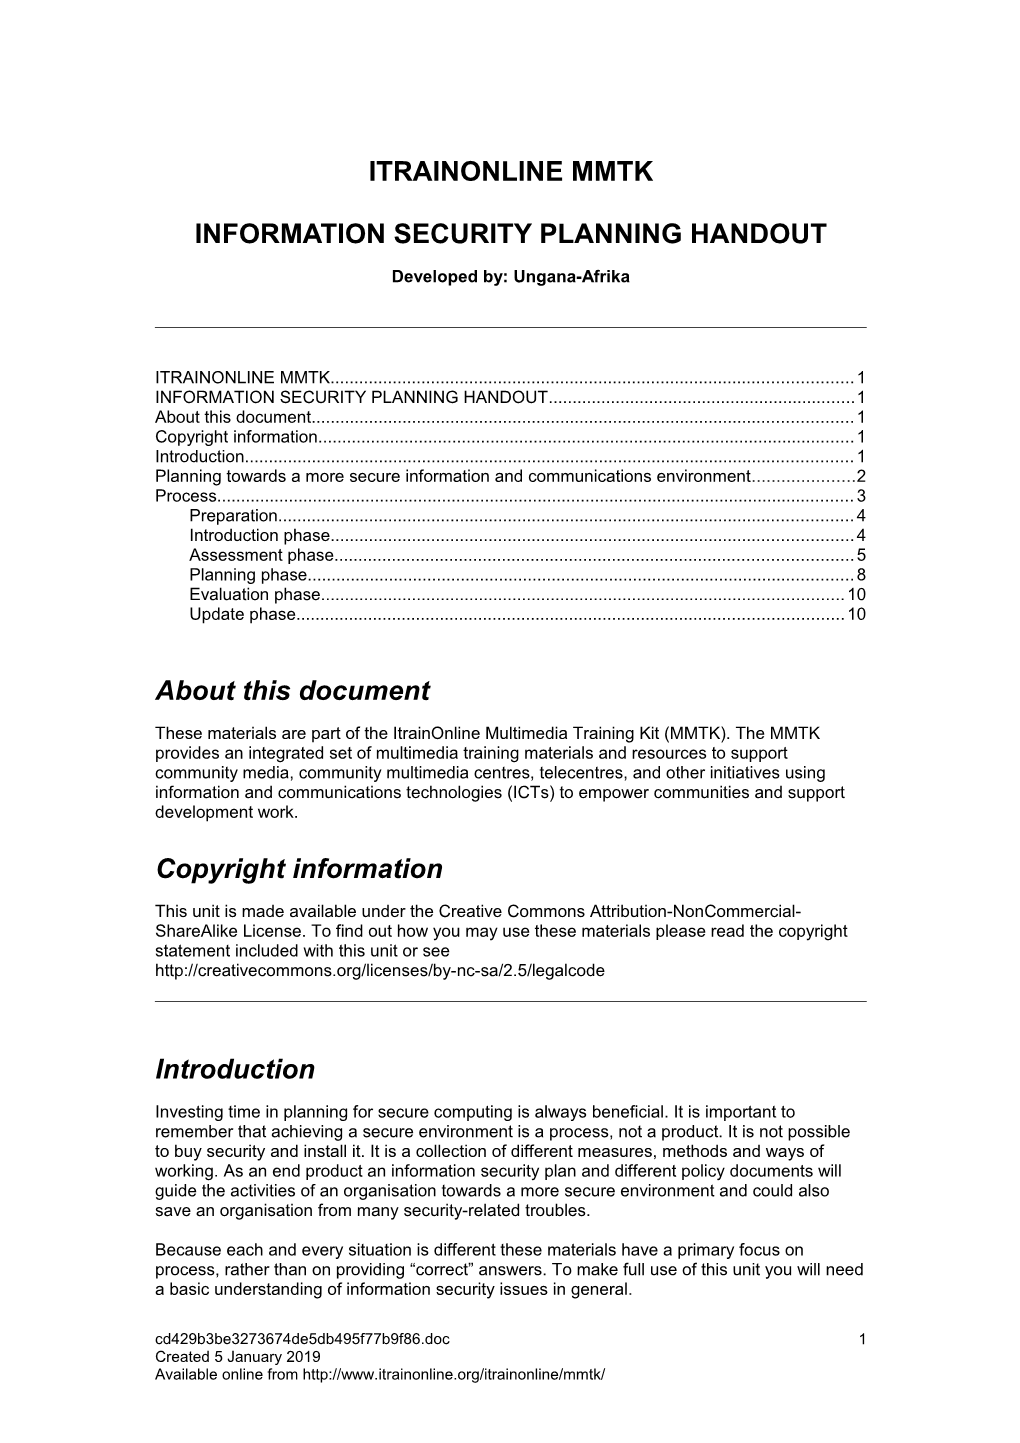 Information Security Planning Handout